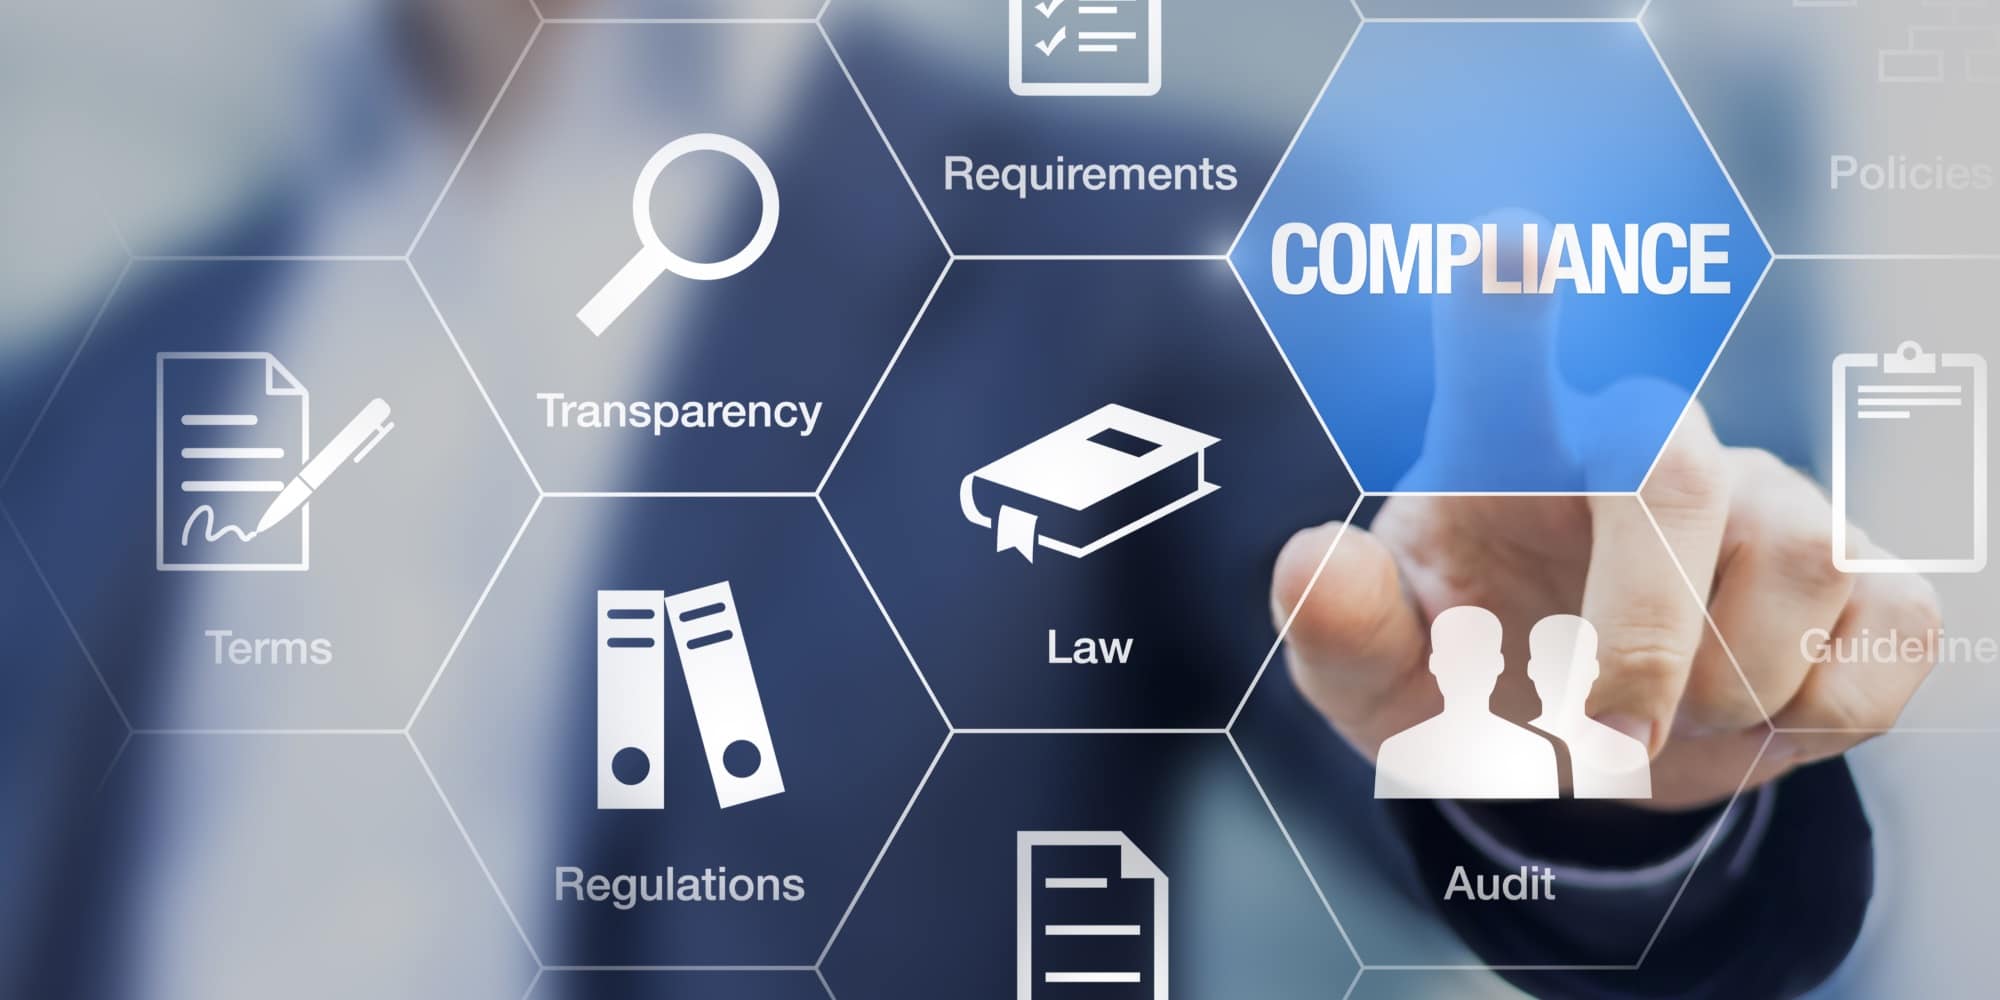 Fintech compliance concept with icons for regulations, law, standards, requirements and audit on a virtual screen with a business person touching a button